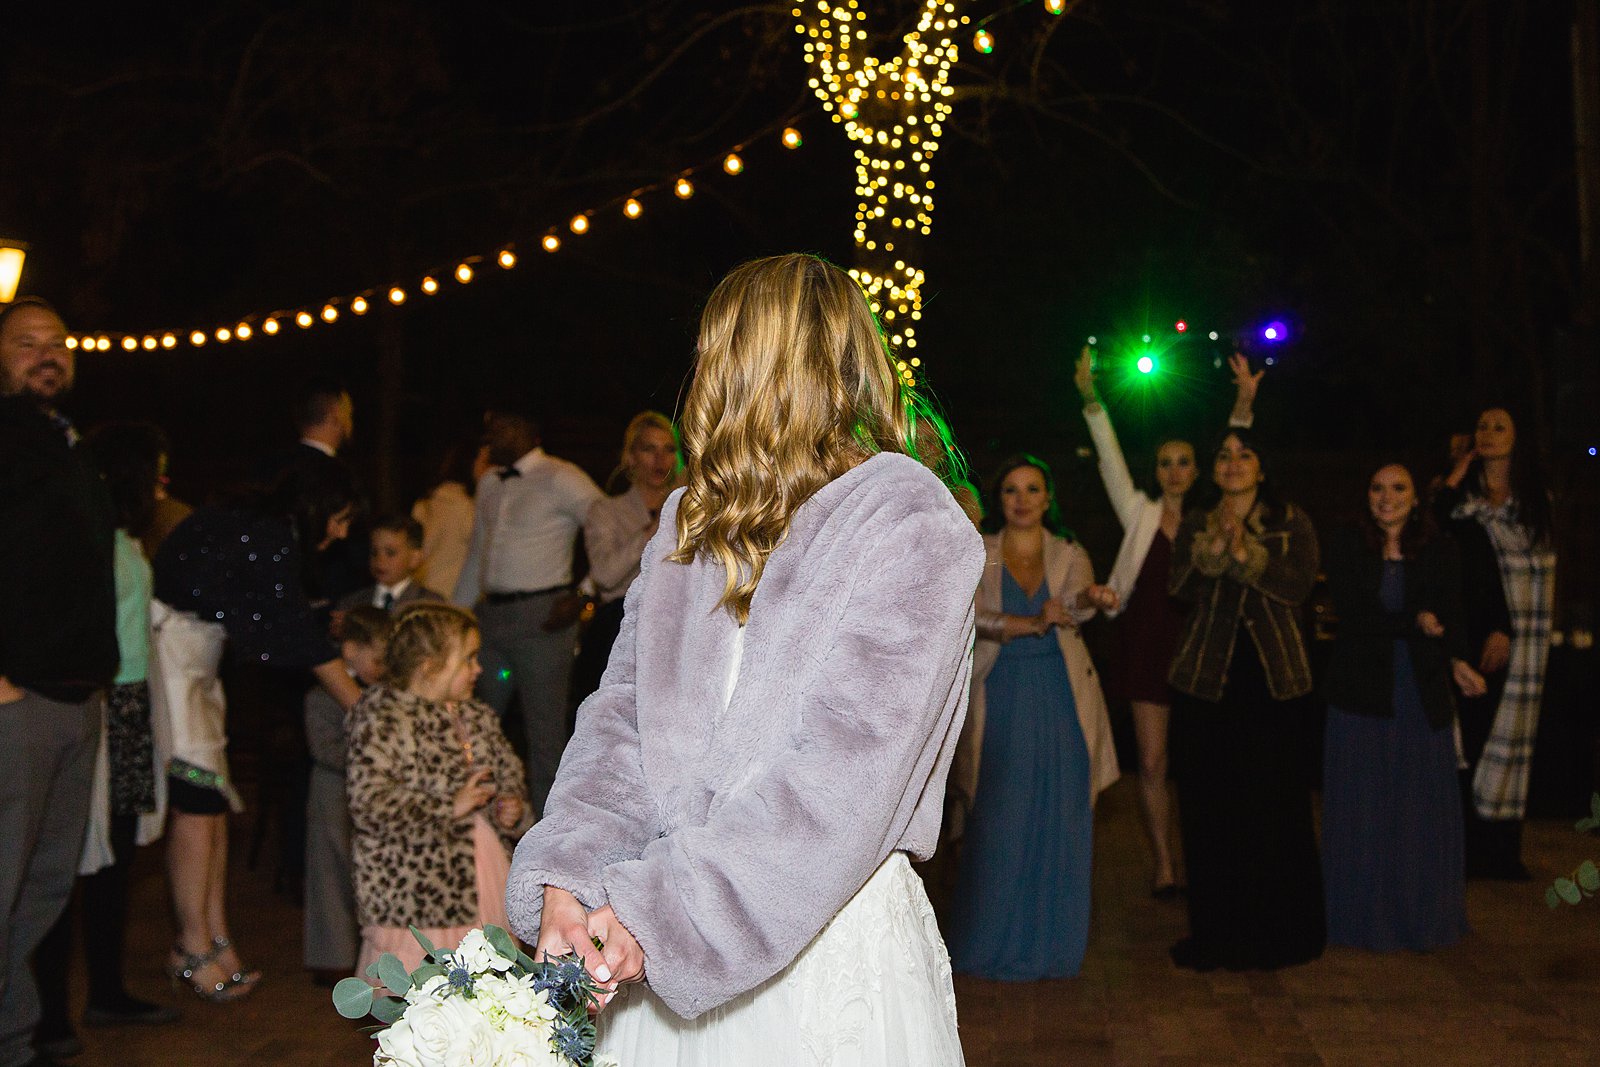 Bouquet toss at Venue At The Grove wedding reception by Phoenix wedding photographer PMA Photography.